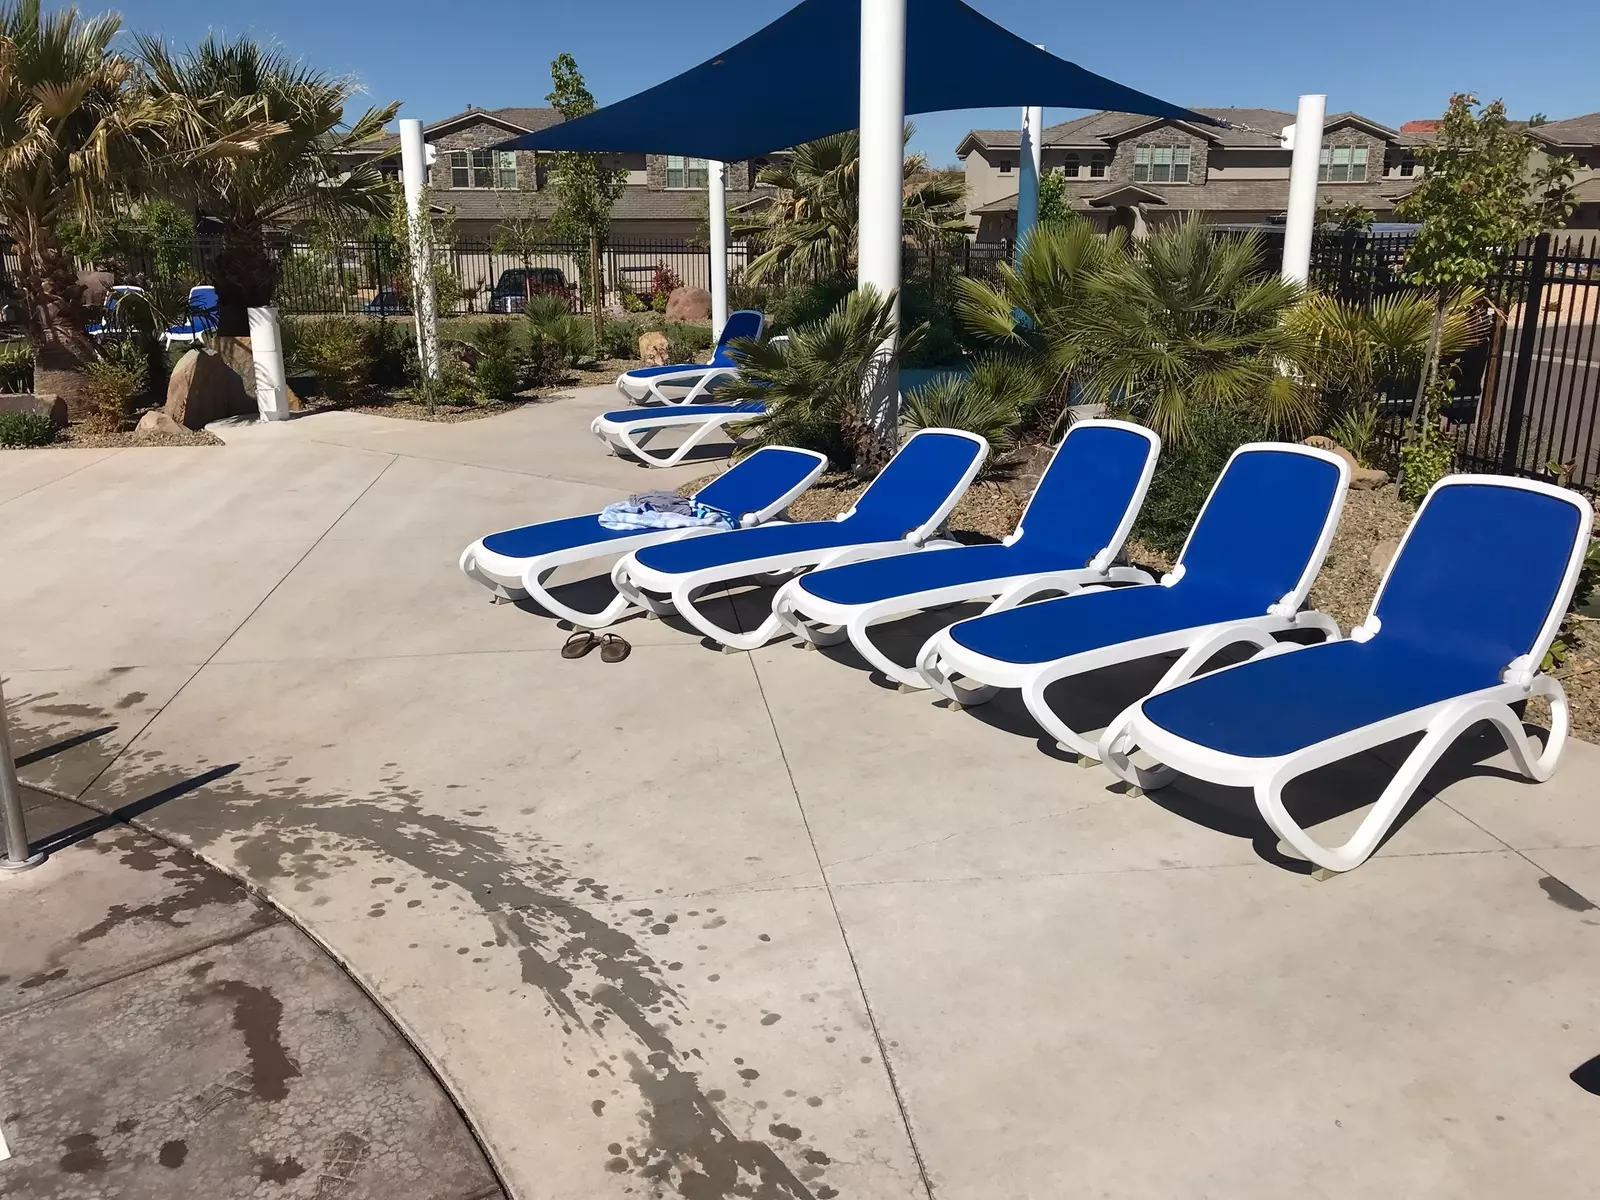 Community Pool area with lounge chairs